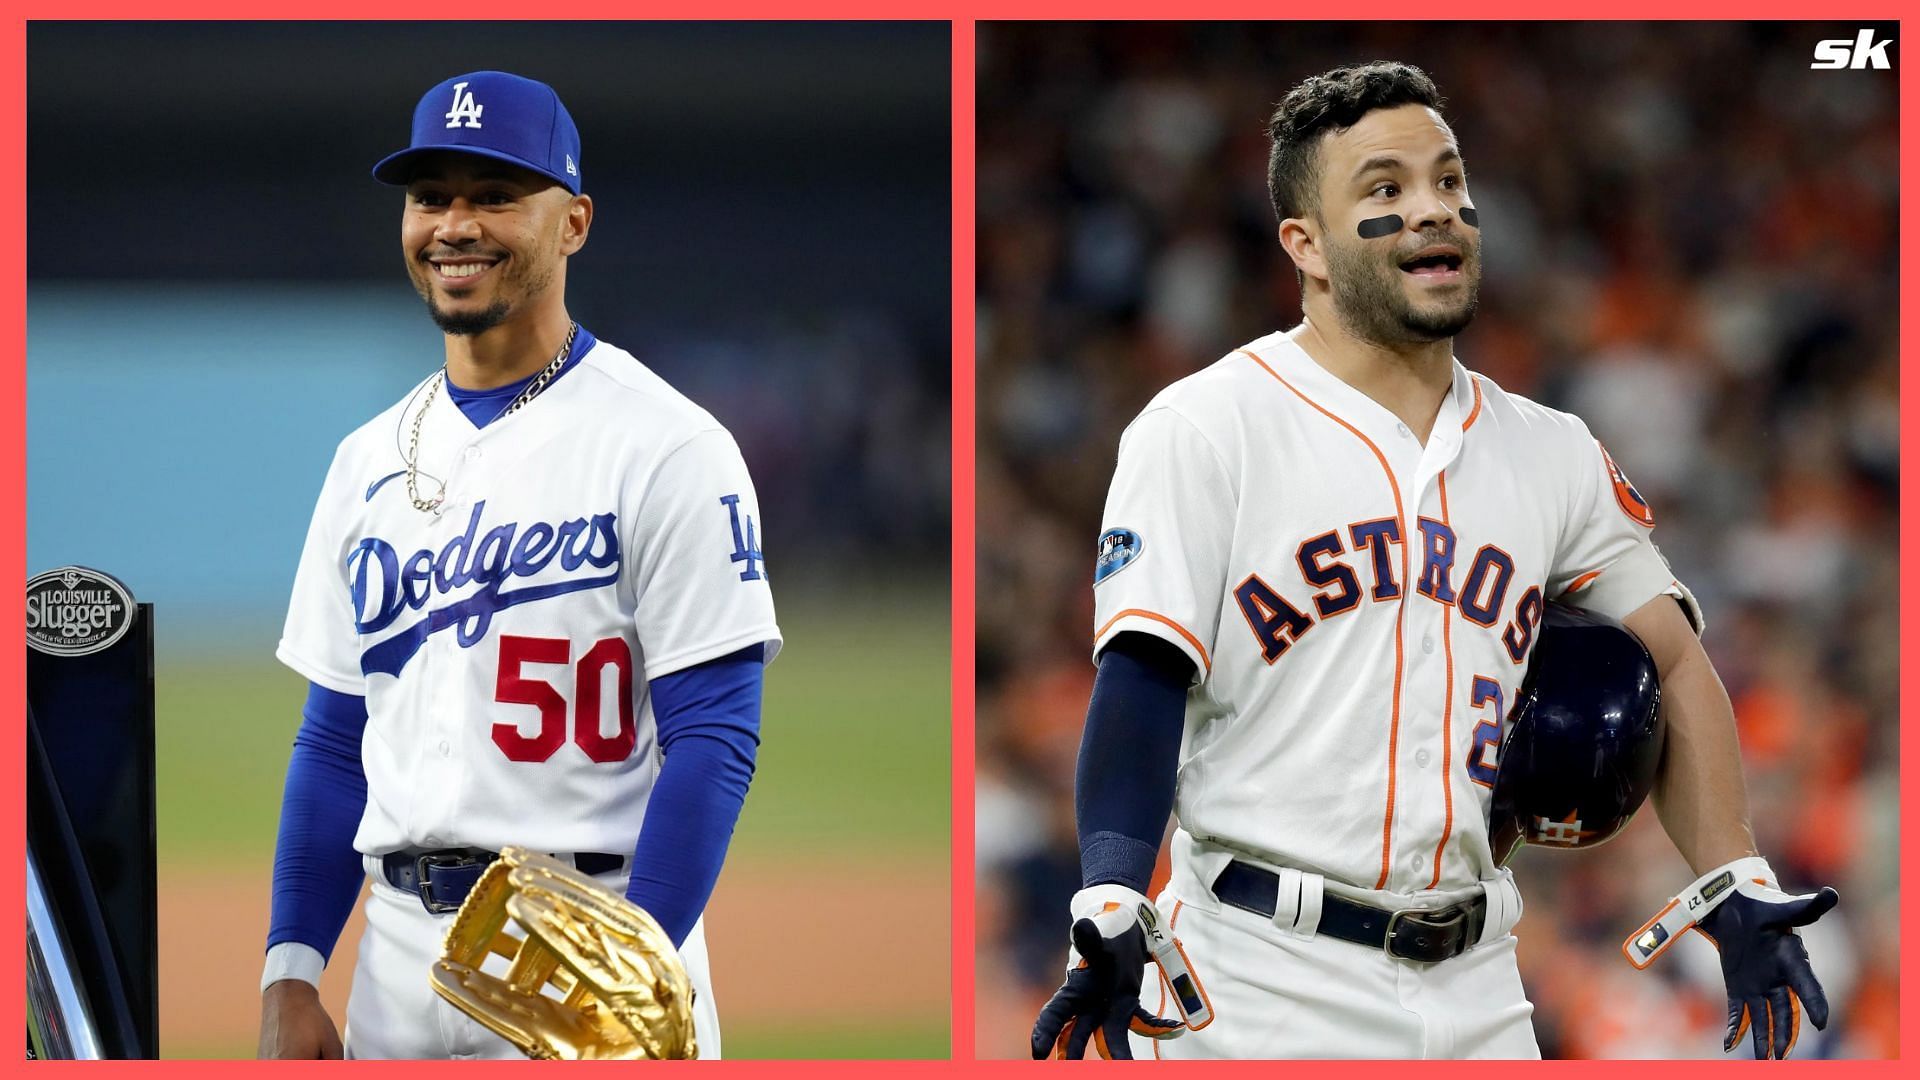 How to watch Dodgers vs Astros TV channels, start time, and live